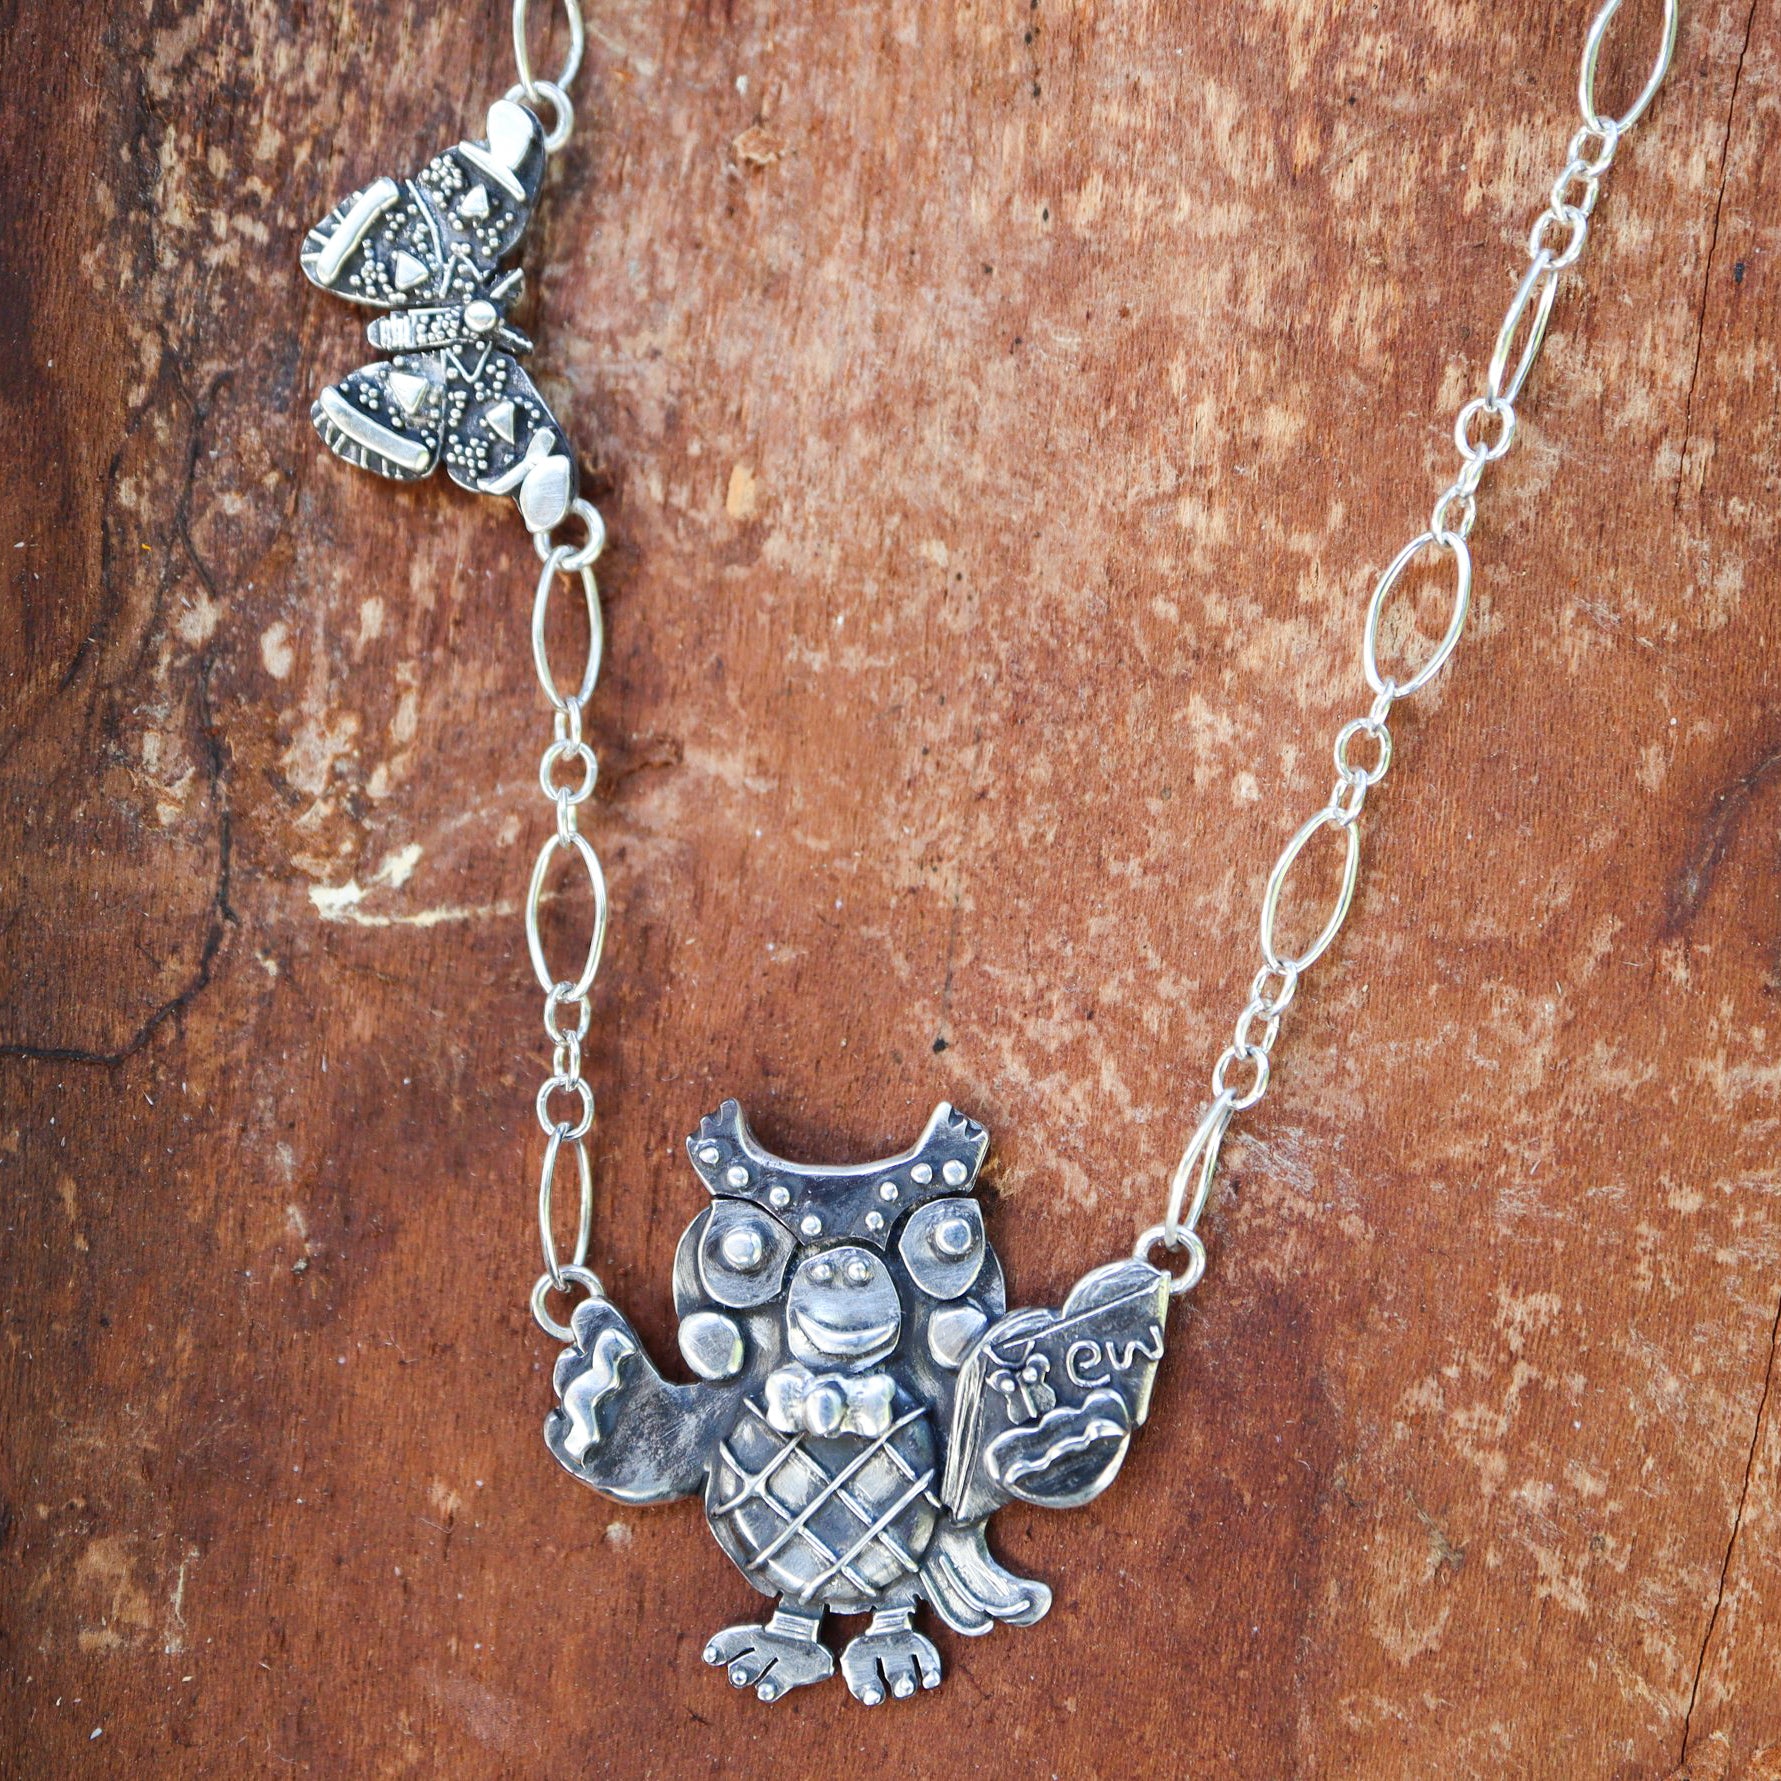 Animal Crossing Blathers necklace with an atlas moth to the left of the necklace. Blathers is holding a little book with a tiny butterfly on it and the word "ew" next to it. This necklace is made from sterling silver and shown on a dark reddish brown piece of wood.